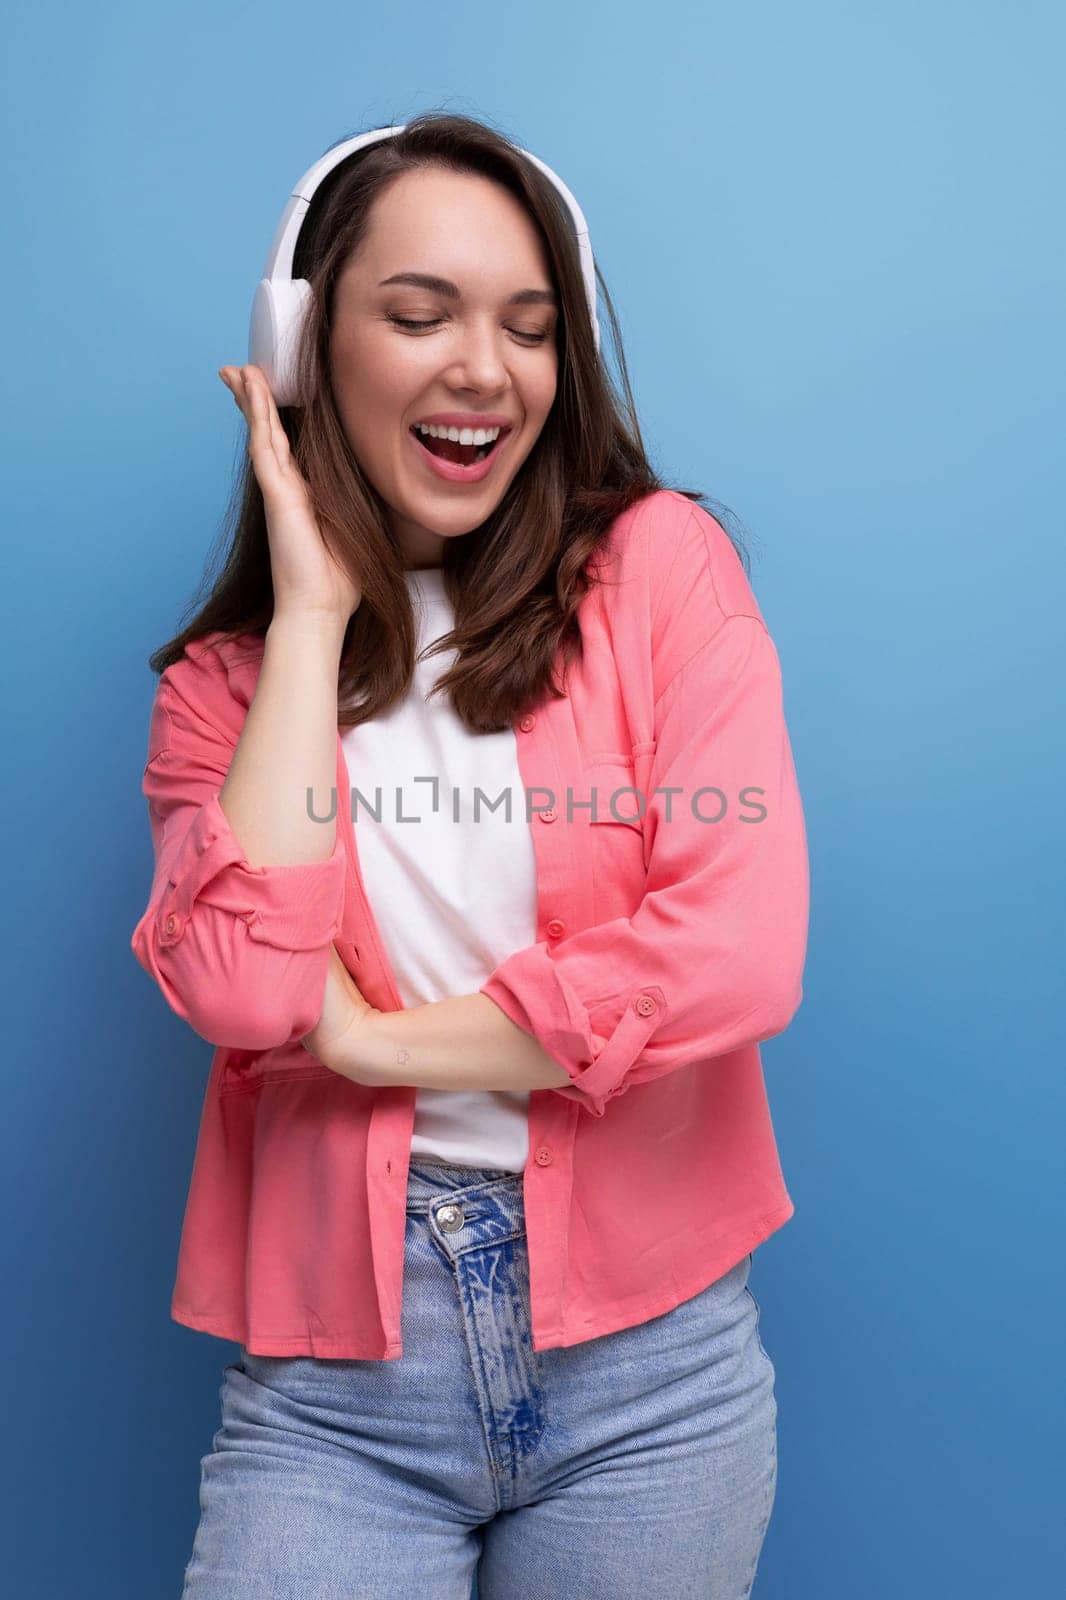 energetic brunette young woman in a shirt and jeans listens to her favorite music on headphones.